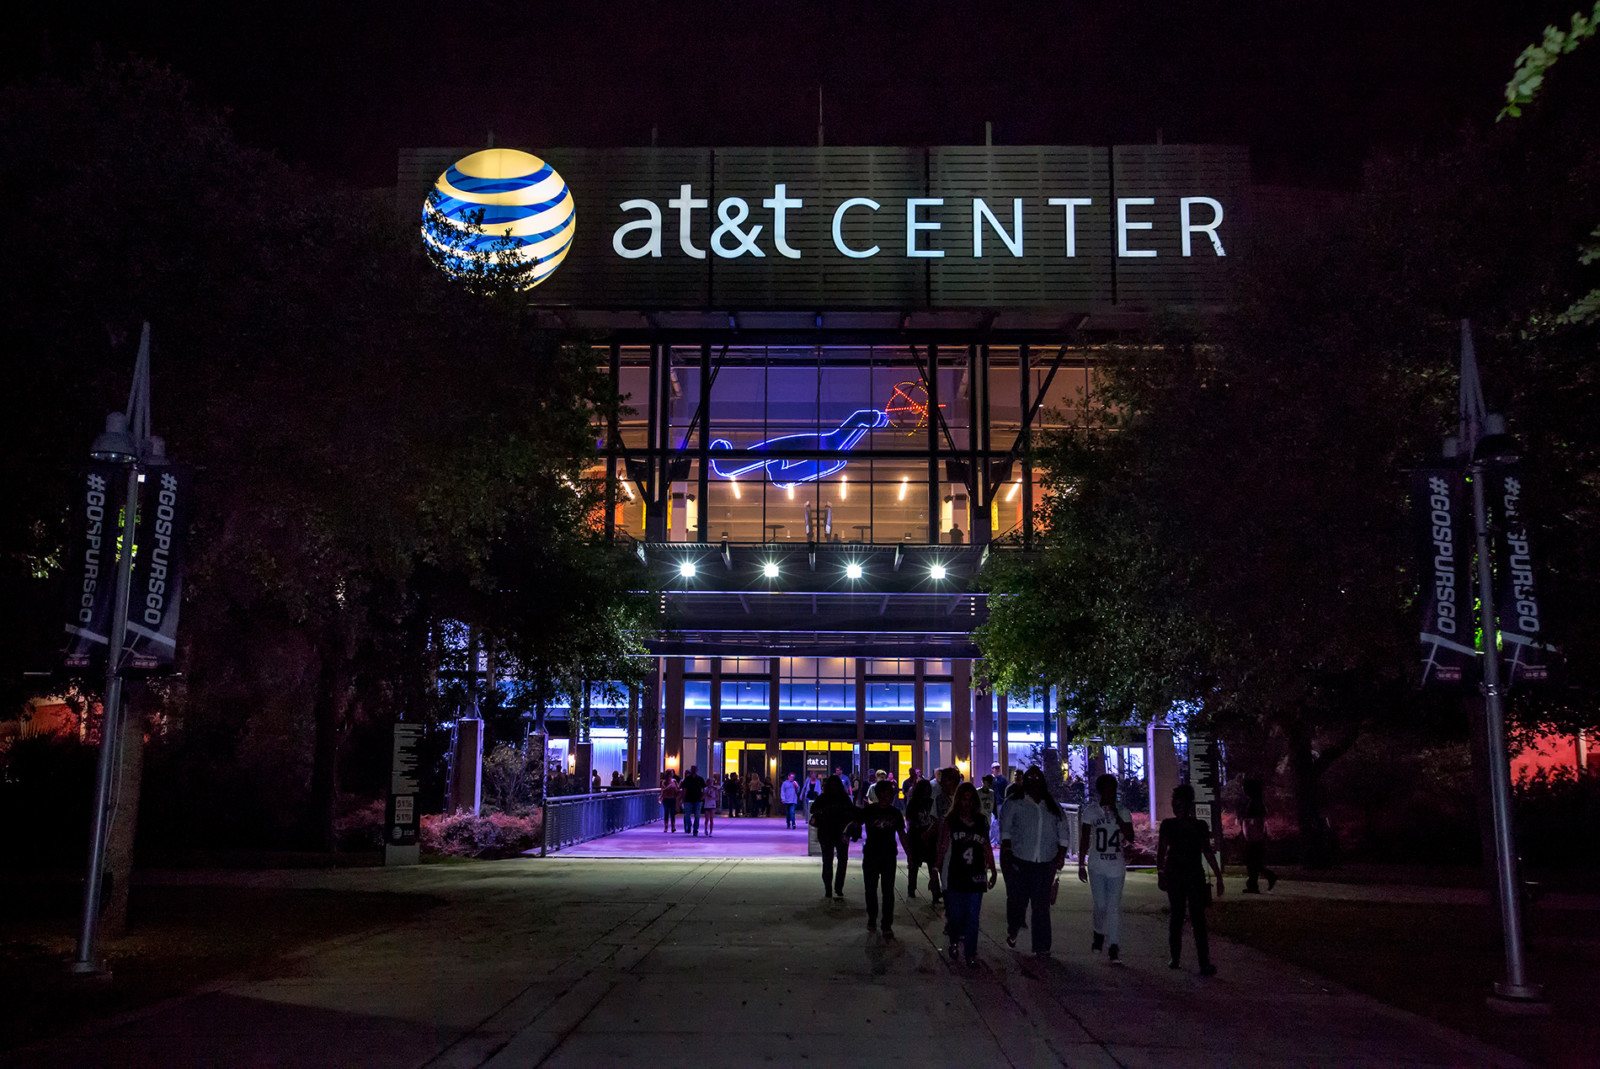 TRAX Improve Facility Management at San Antonio Spurs AT&T Center